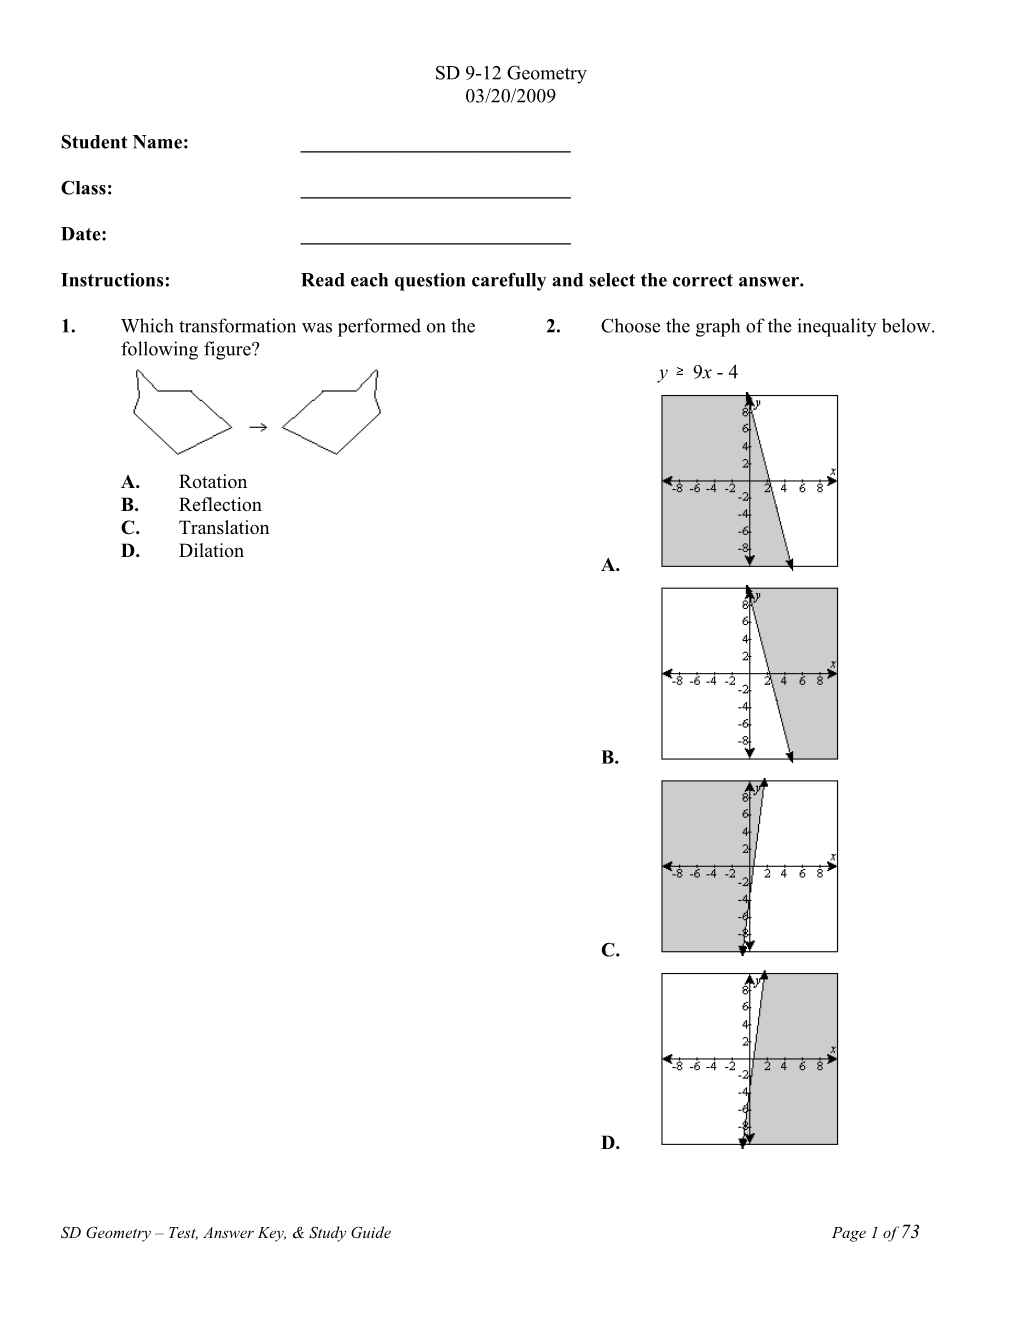 Instructions: Read Each Question Carefully and Select the Correct Answer s1